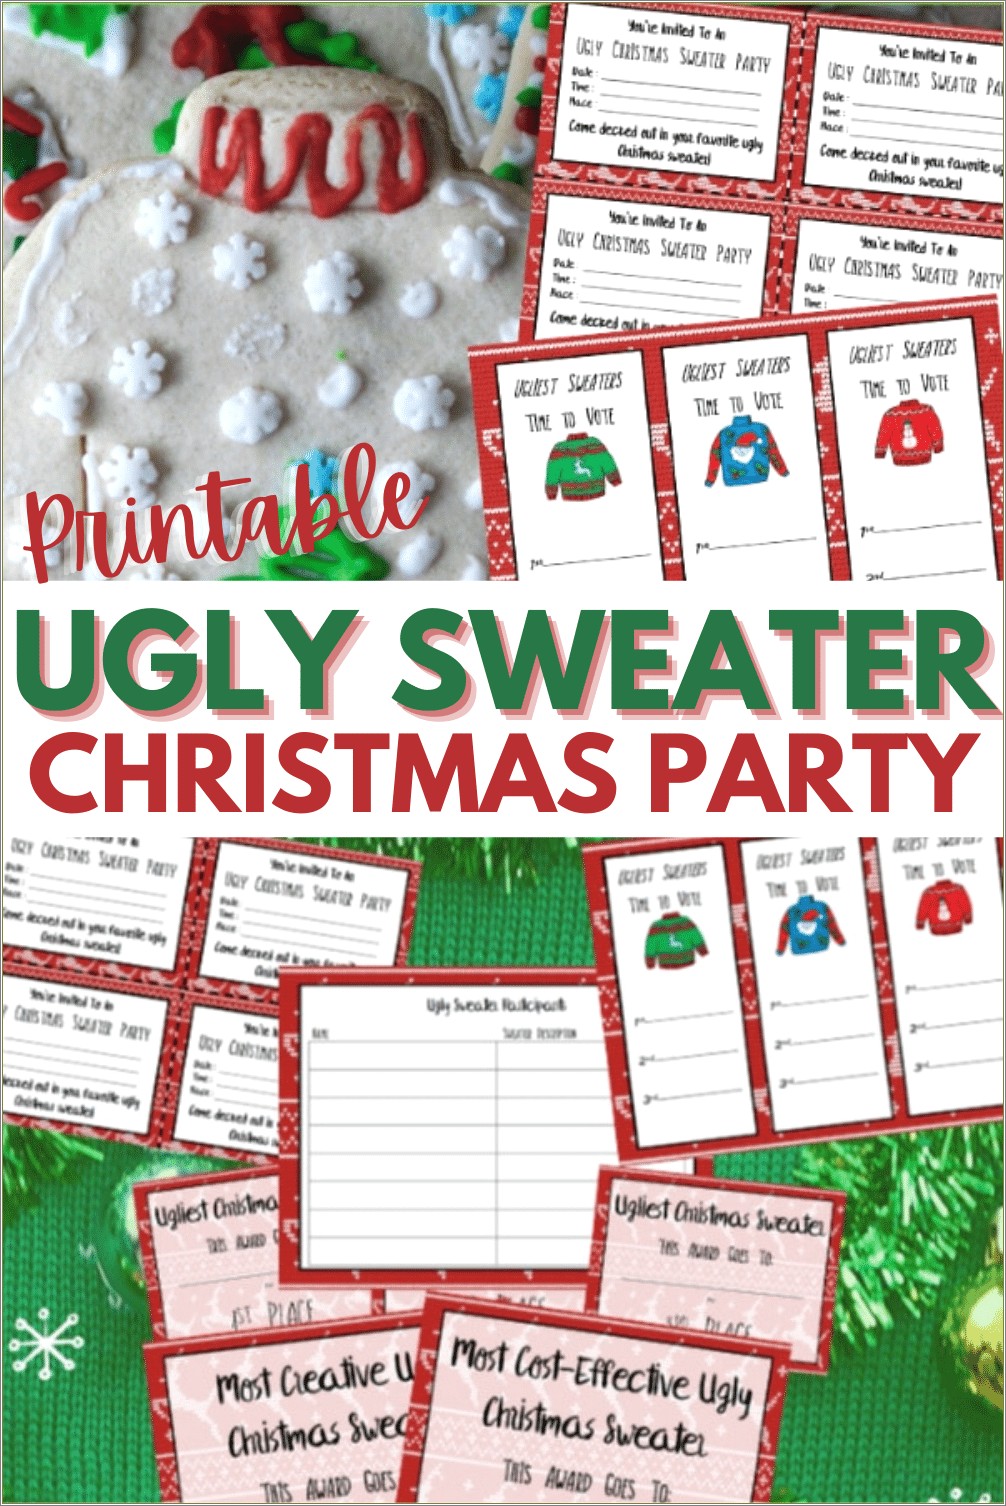 Ugly Christmas Sweater Party Invitations Free Templates